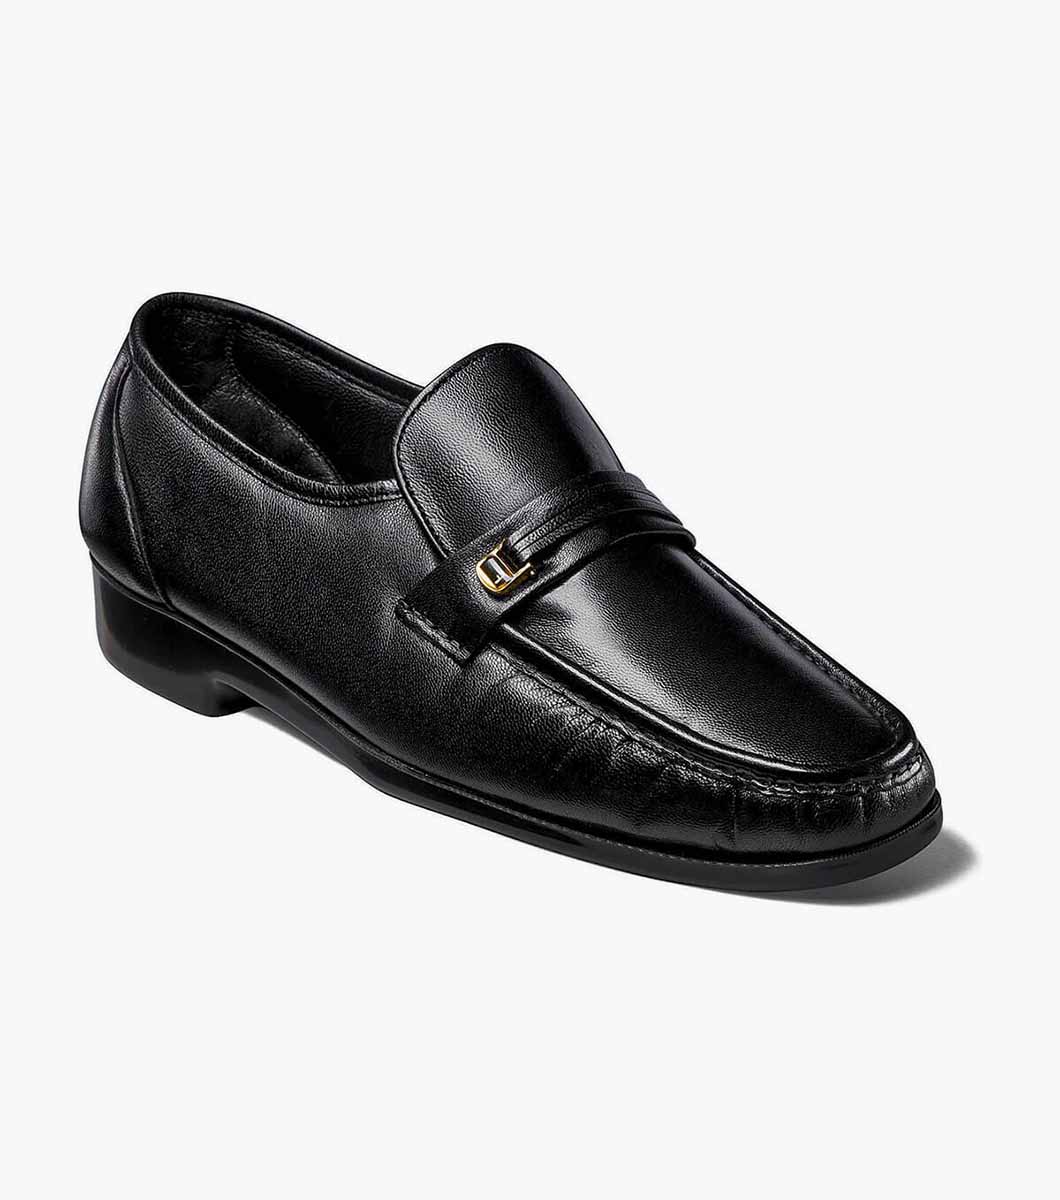 Men's Milano Leather Loafer